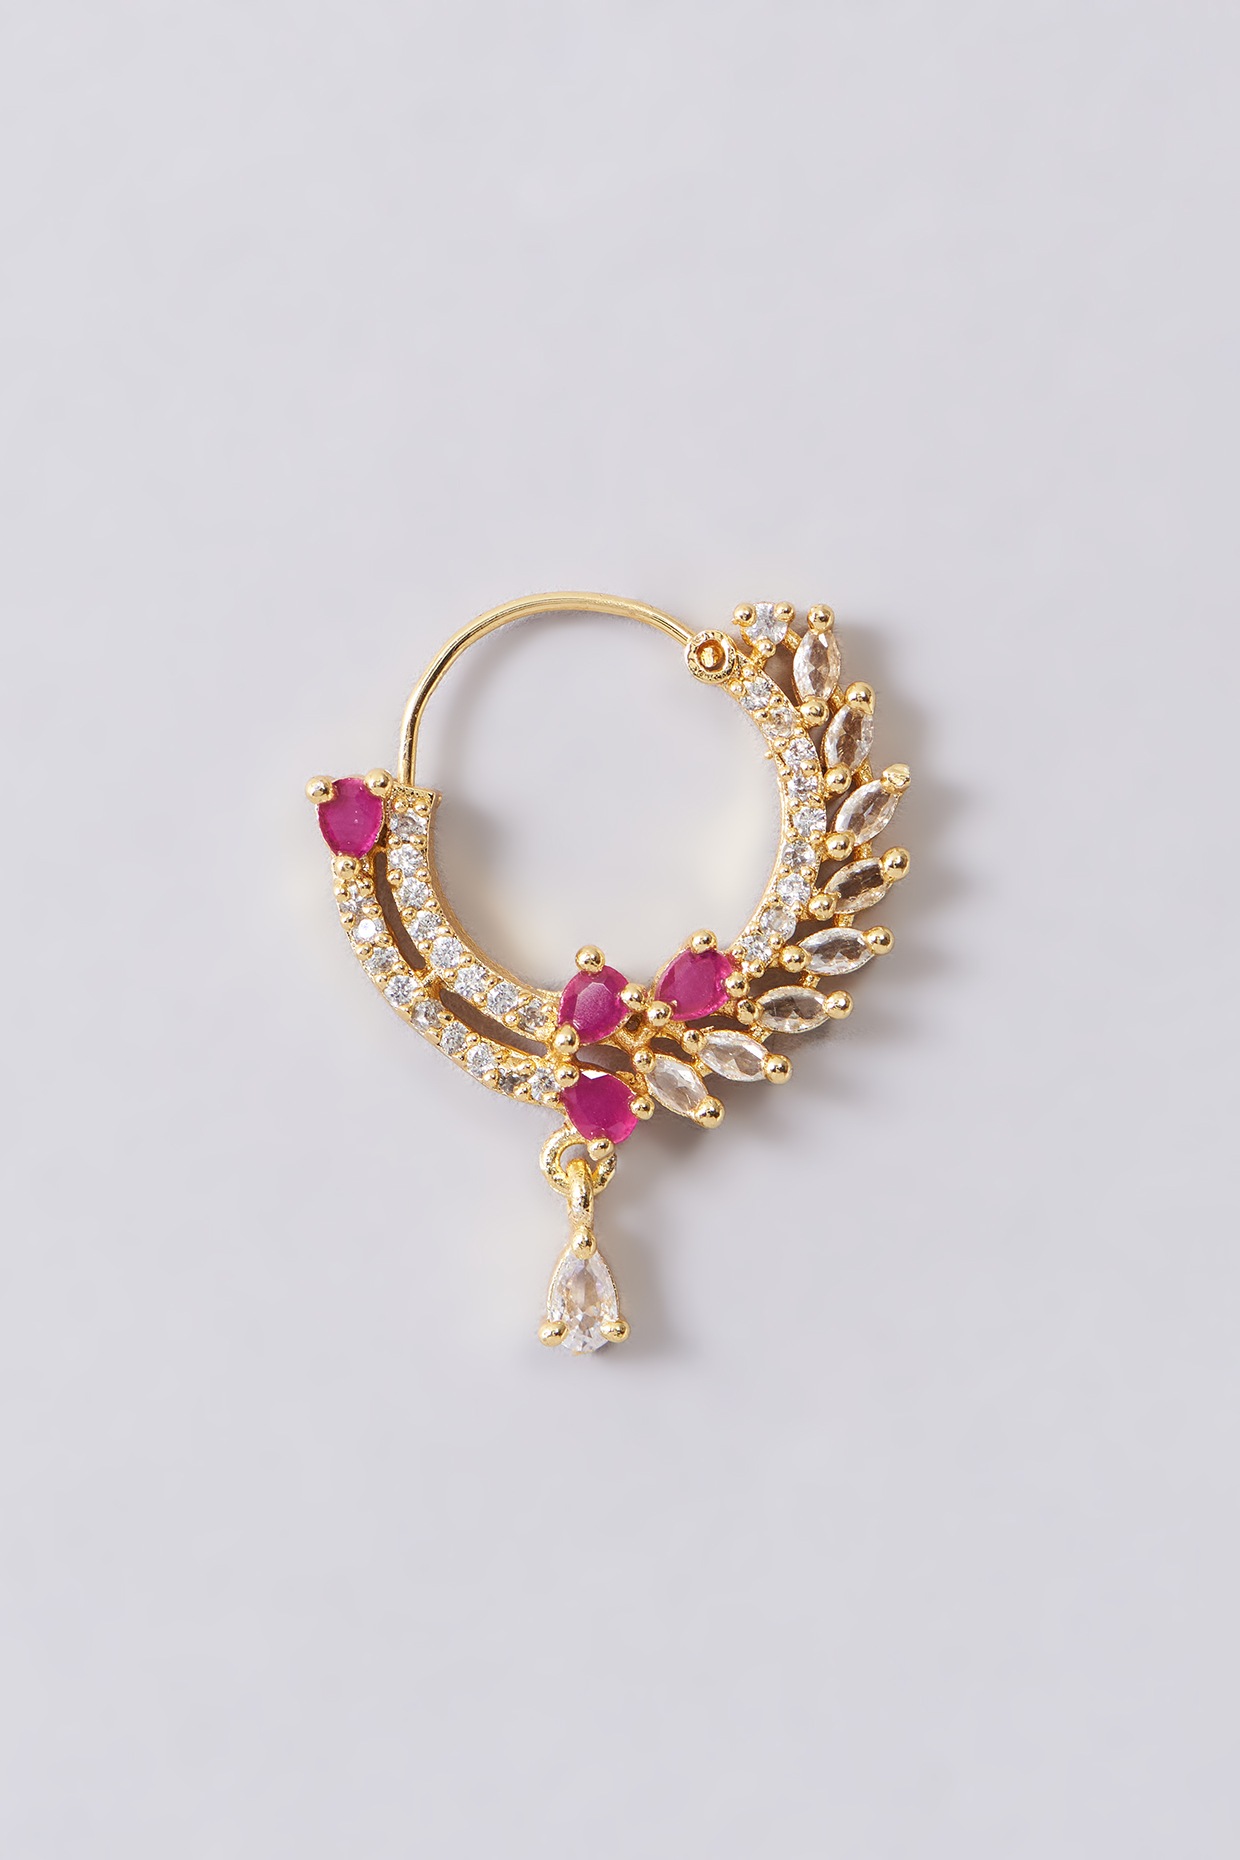 Buy Chinar Jewels Nose Ring Bridal Nathiya/Nath/Nathni/Nathaniya in Kundan,  Gold Plated in Pink and Golden Color with Pearl and Chain Silver & Alloy  can be wore in for Girls and Women at